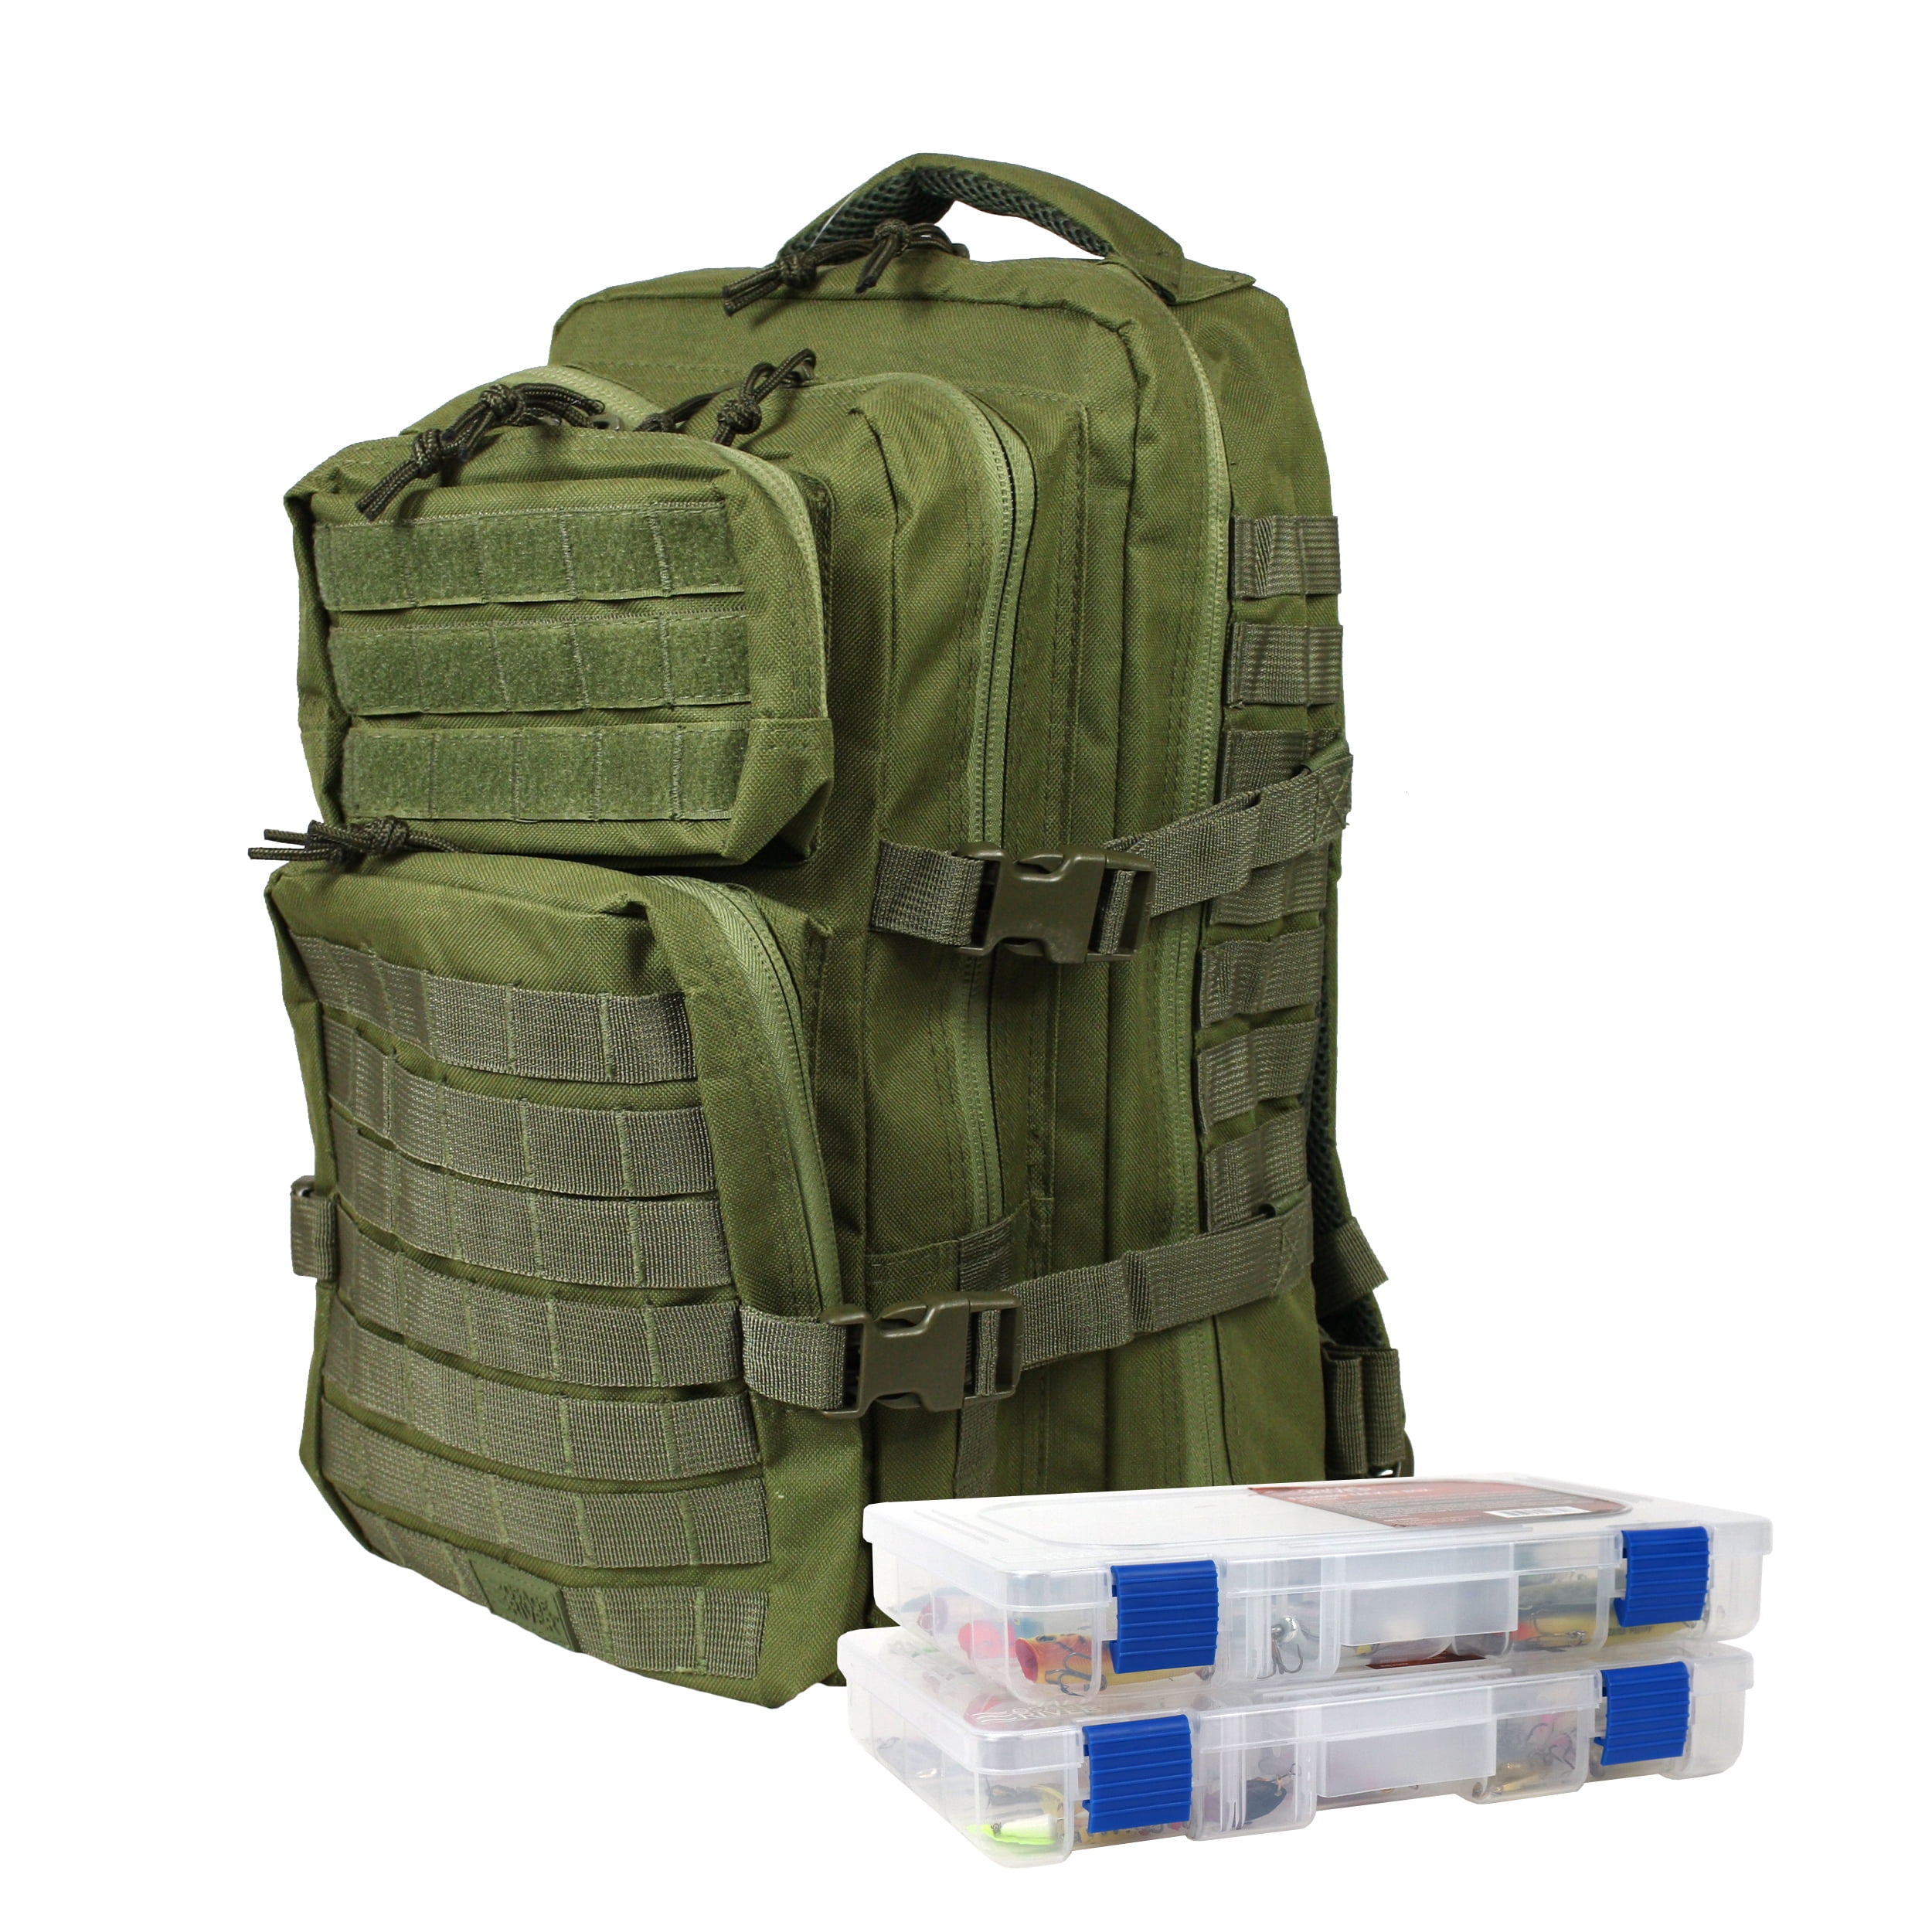 Osage River Gear Fishing Backpack, Tackle and Rod Storage